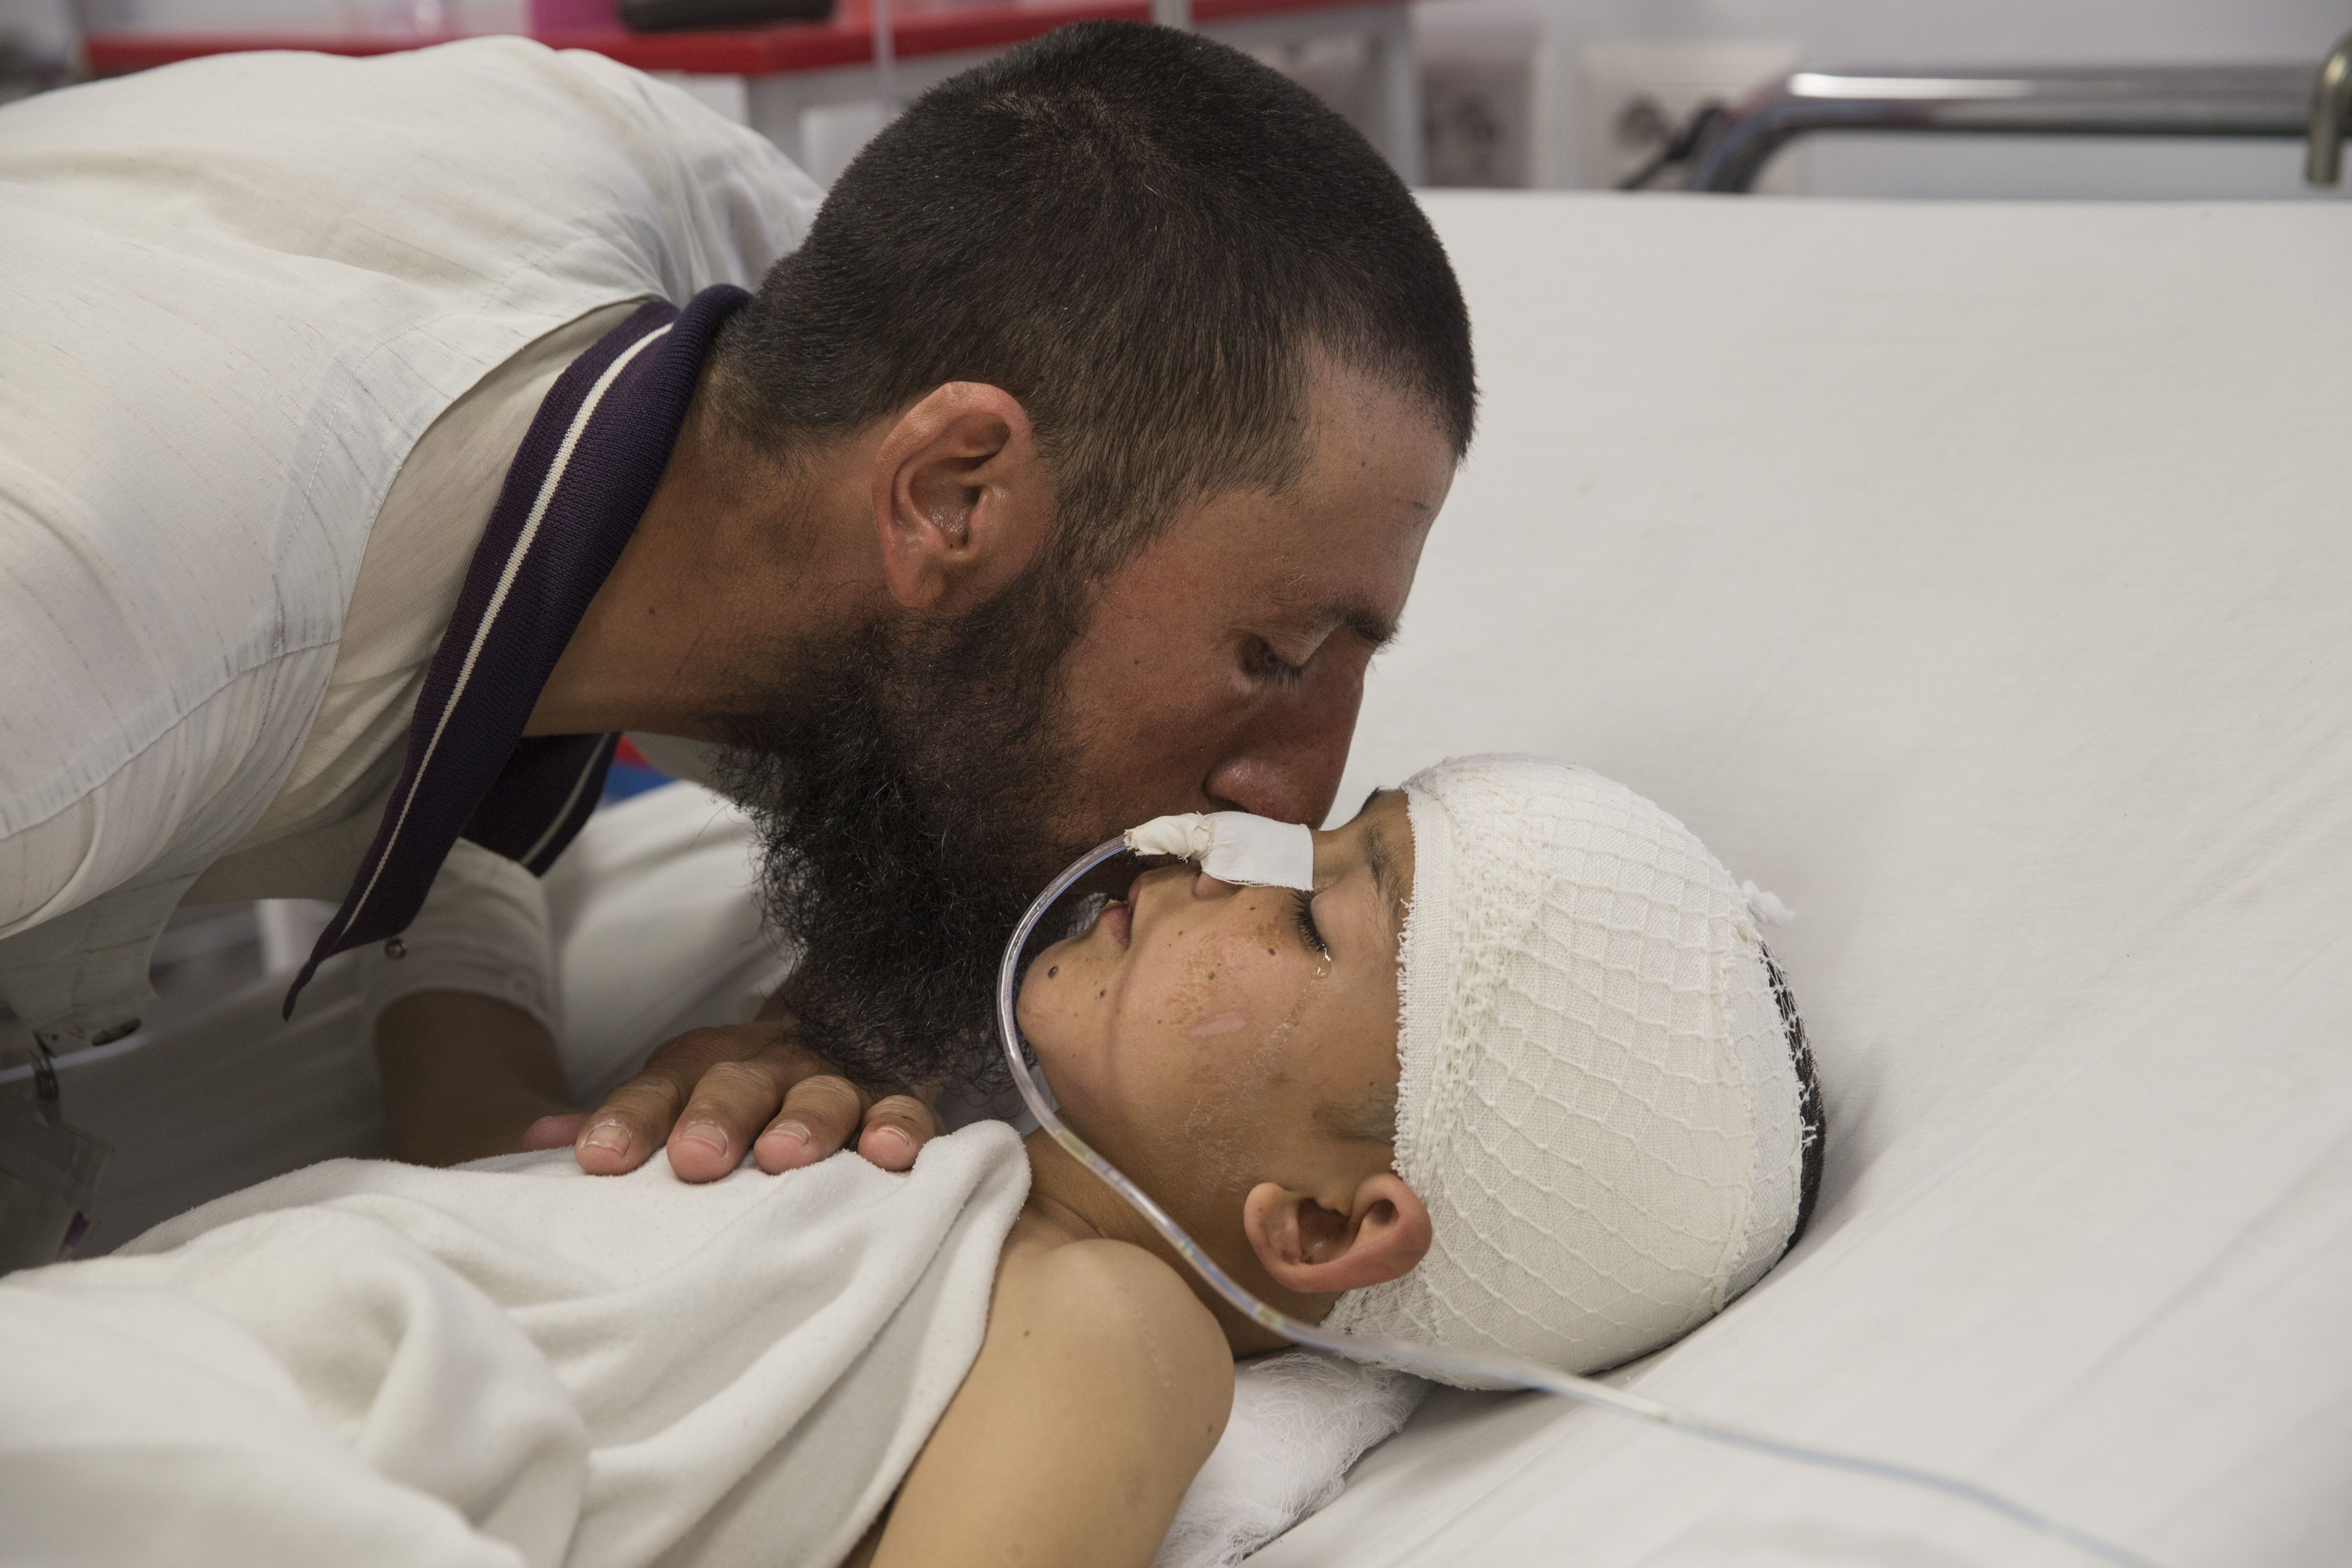 Abdul Kabir kisses his son Noor Ahmad, unconscious with a severe brain injury from an improvised explosive device. Noor was also injured from the explosion, but fully recovered. Image by Paula Bronstein. Afghanistan, 2015. 